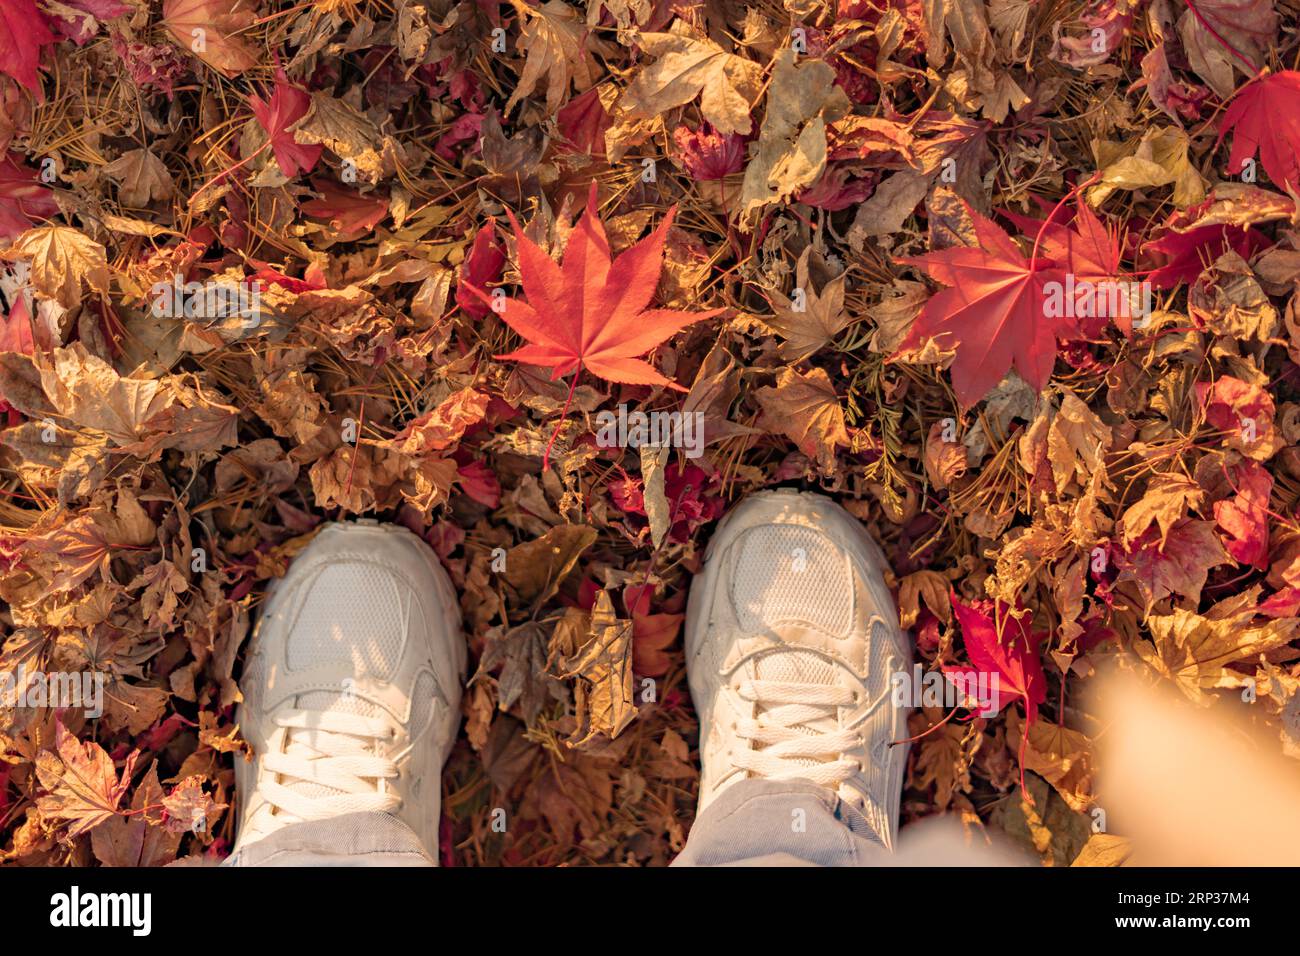 A person's feet in white sneakers standing on fallen autumn leaves, showing a fallen red maple leaf Stock Photo